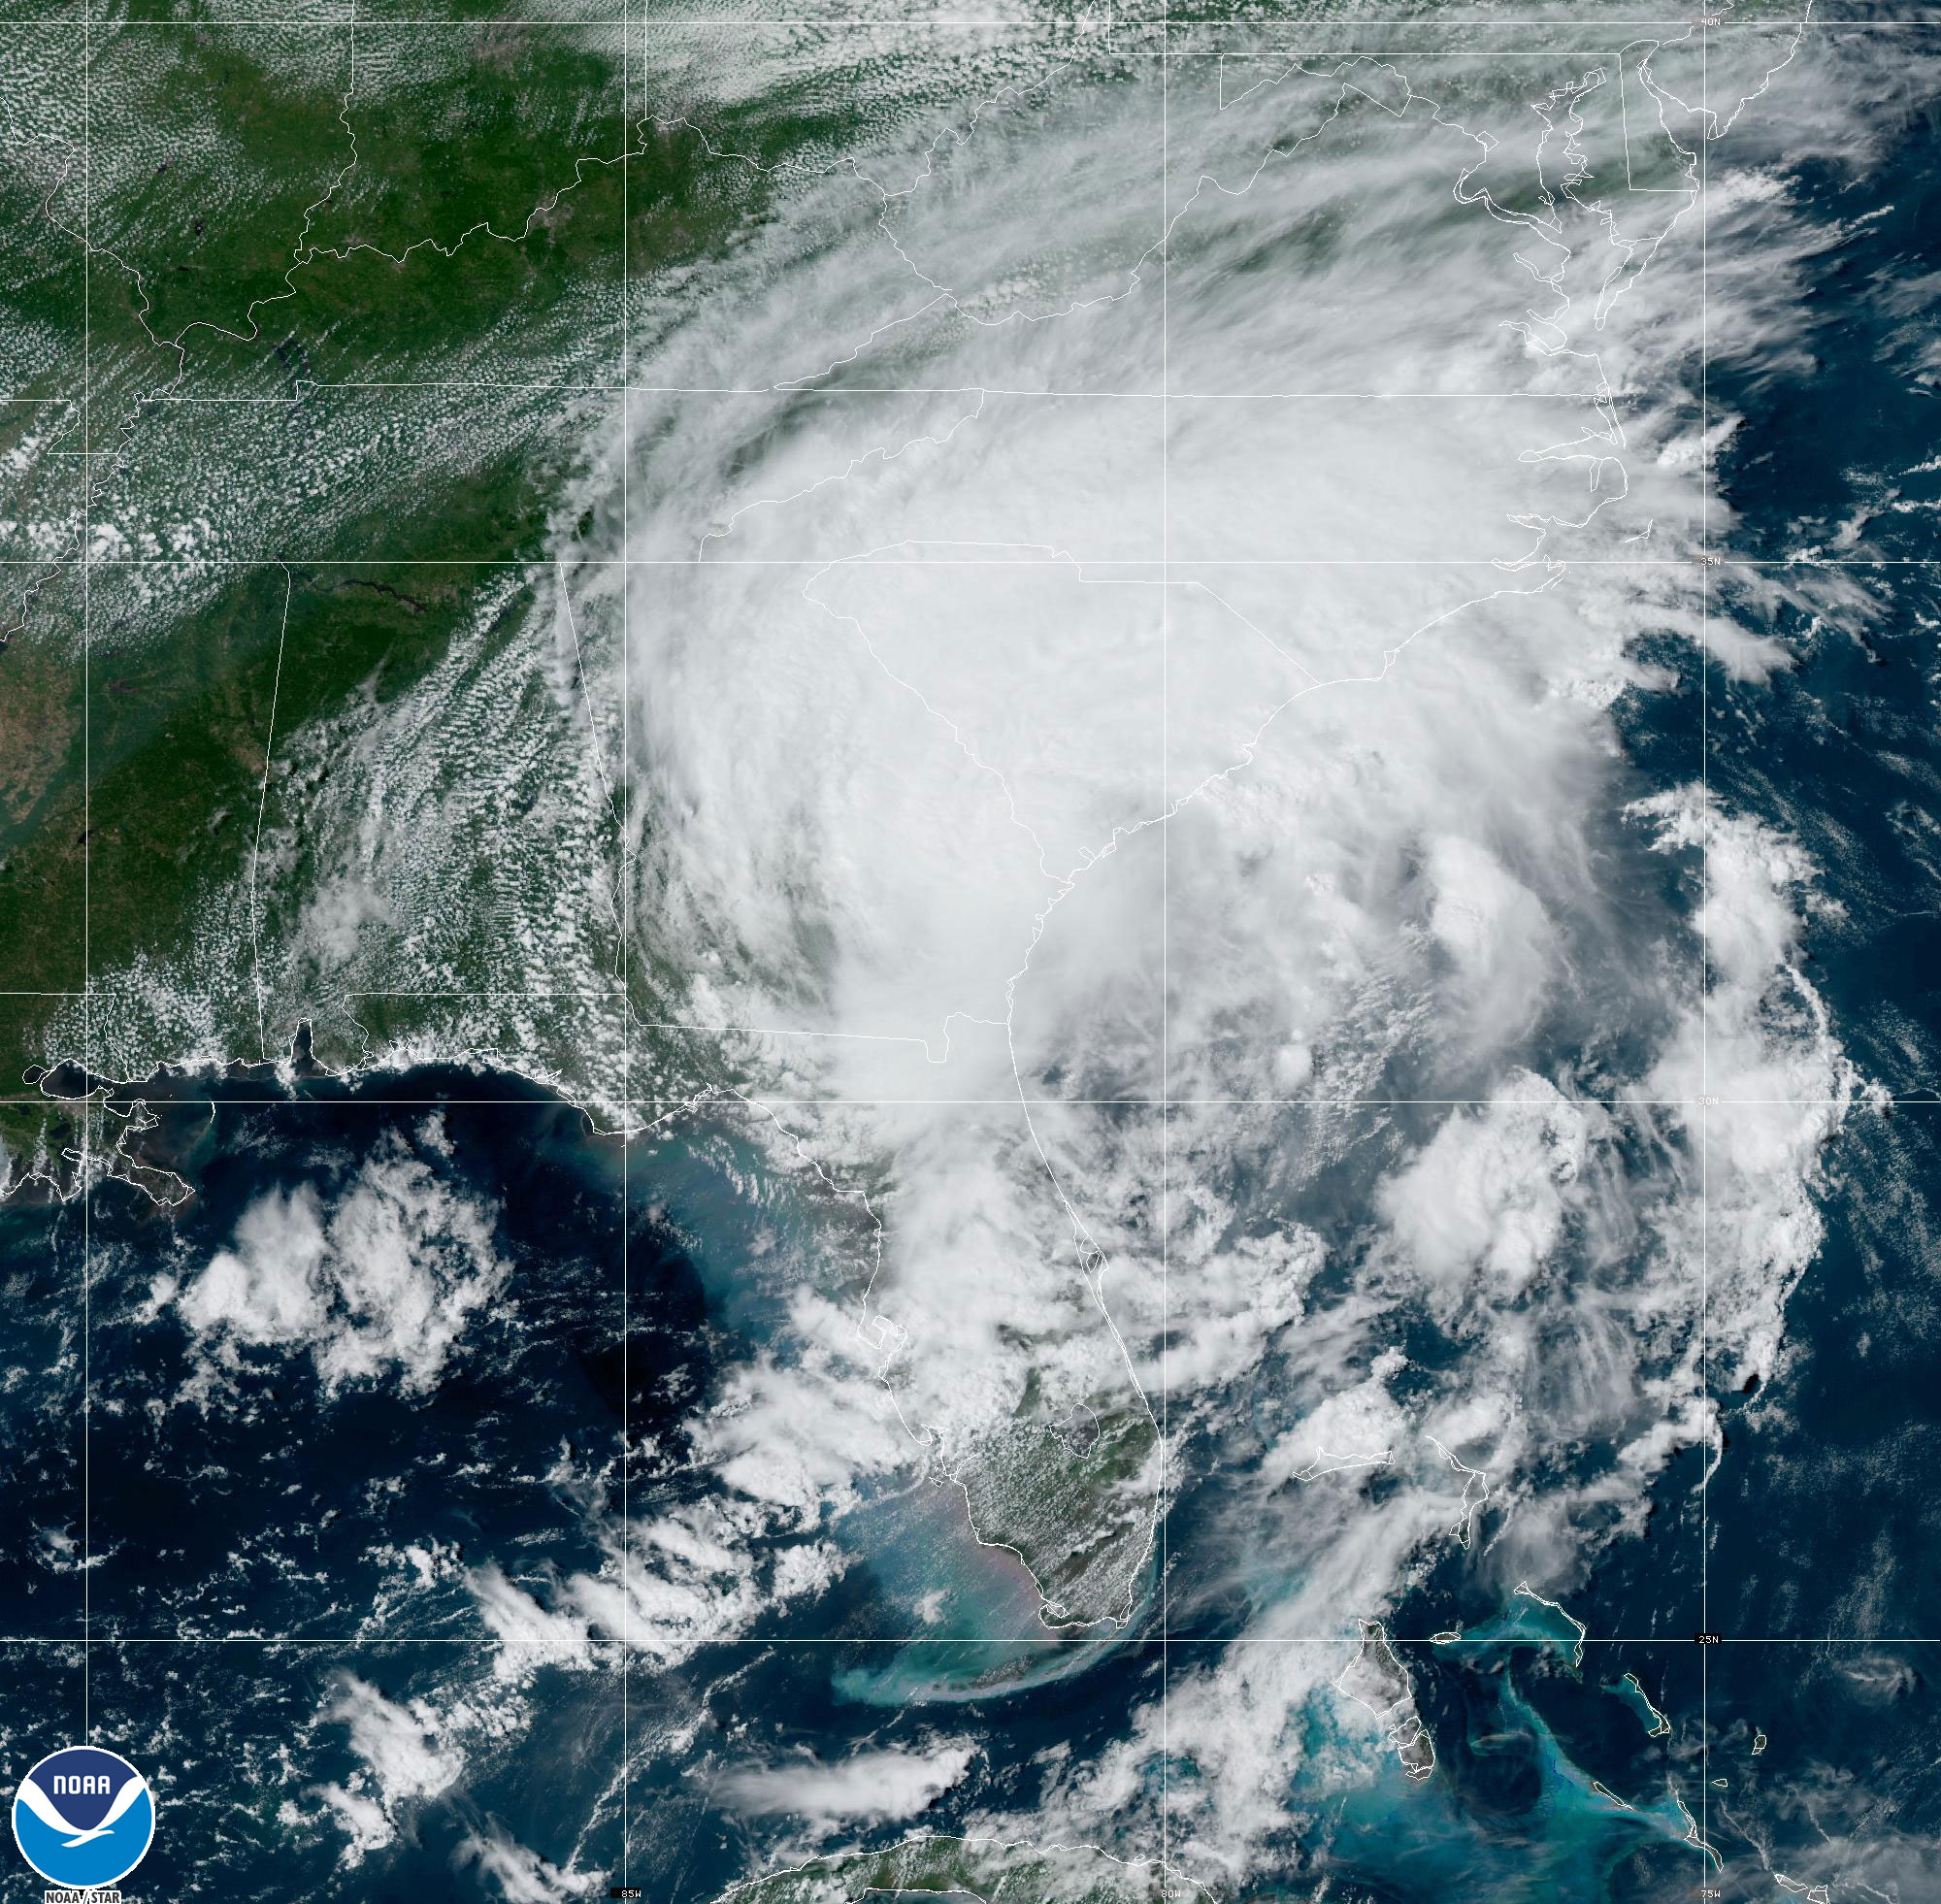 Idalia is seen mostly over Georgia and the Carolinas in this satellite image taken at 3:49 pm ET on Wednesday.